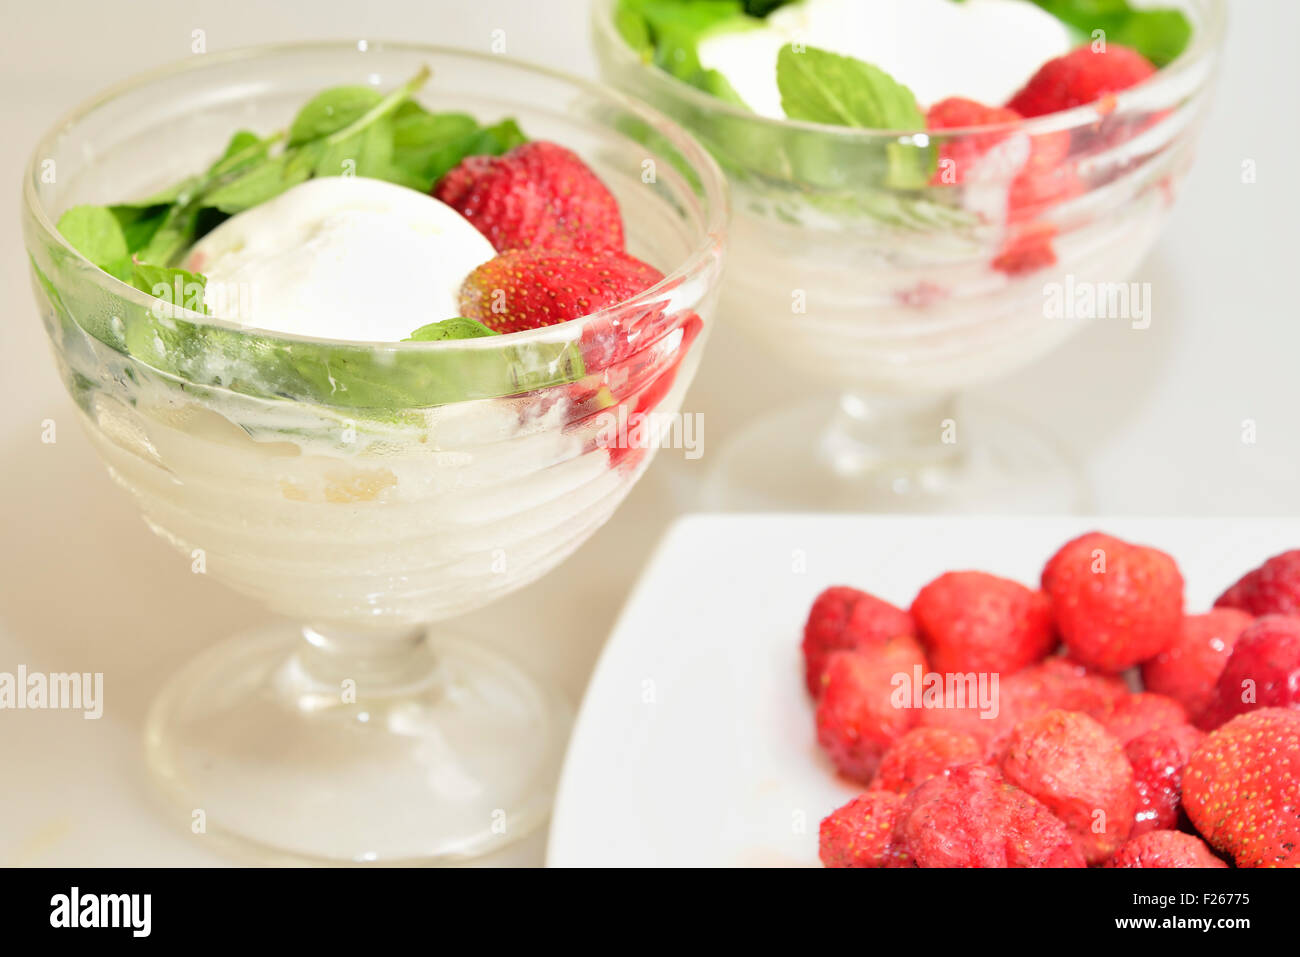 two ice-cream and plate with strawberries Stock Photo